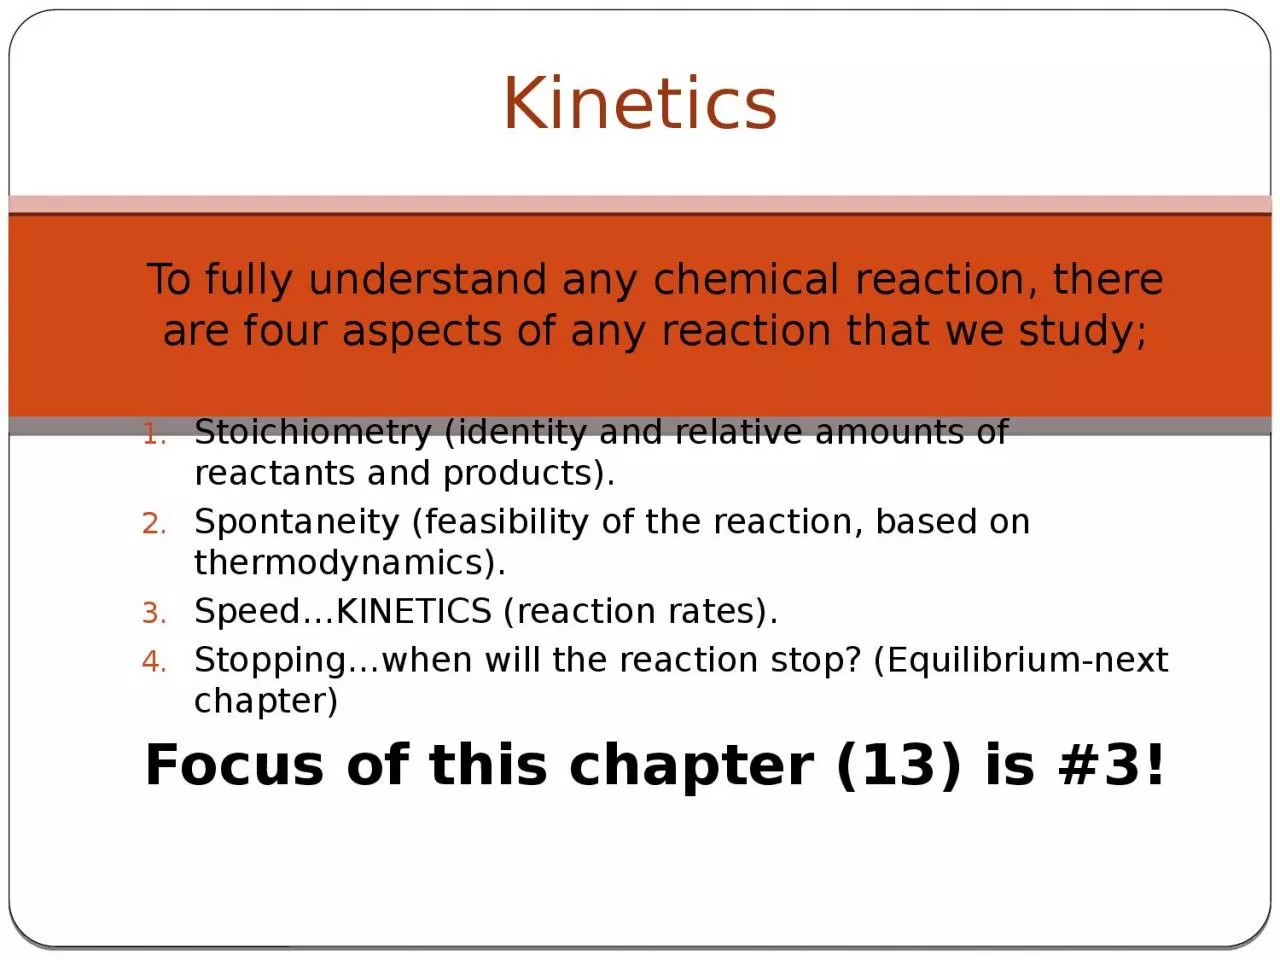 To fully understand any chemical reaction, there are four aspects of any reaction that